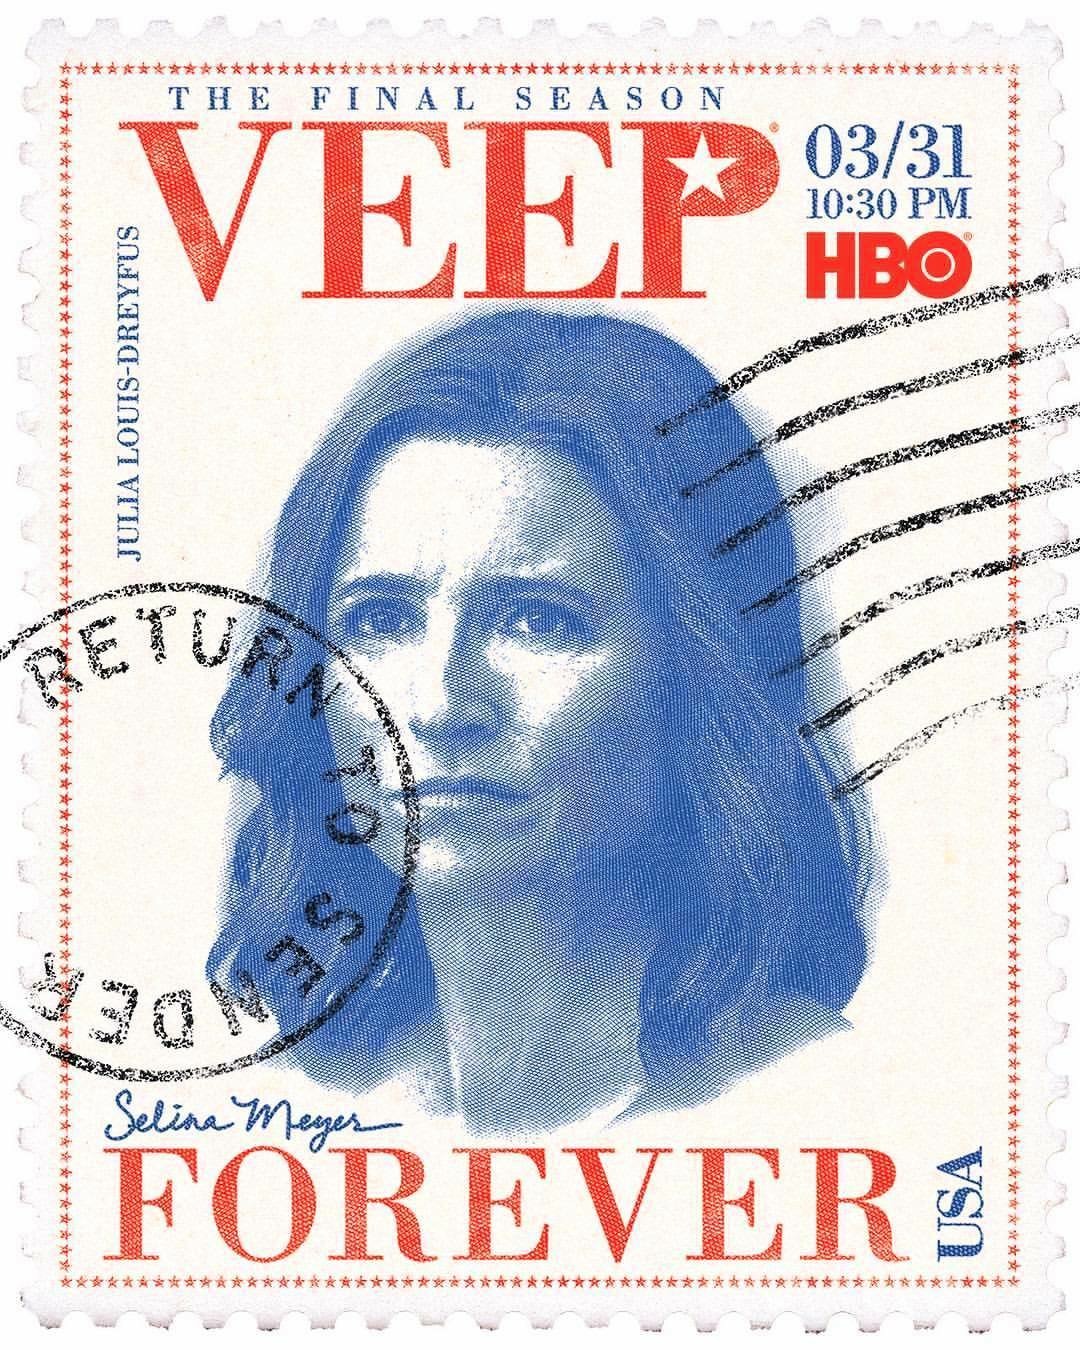 Extra Large TV Poster Image for Veep (#18 of 18)